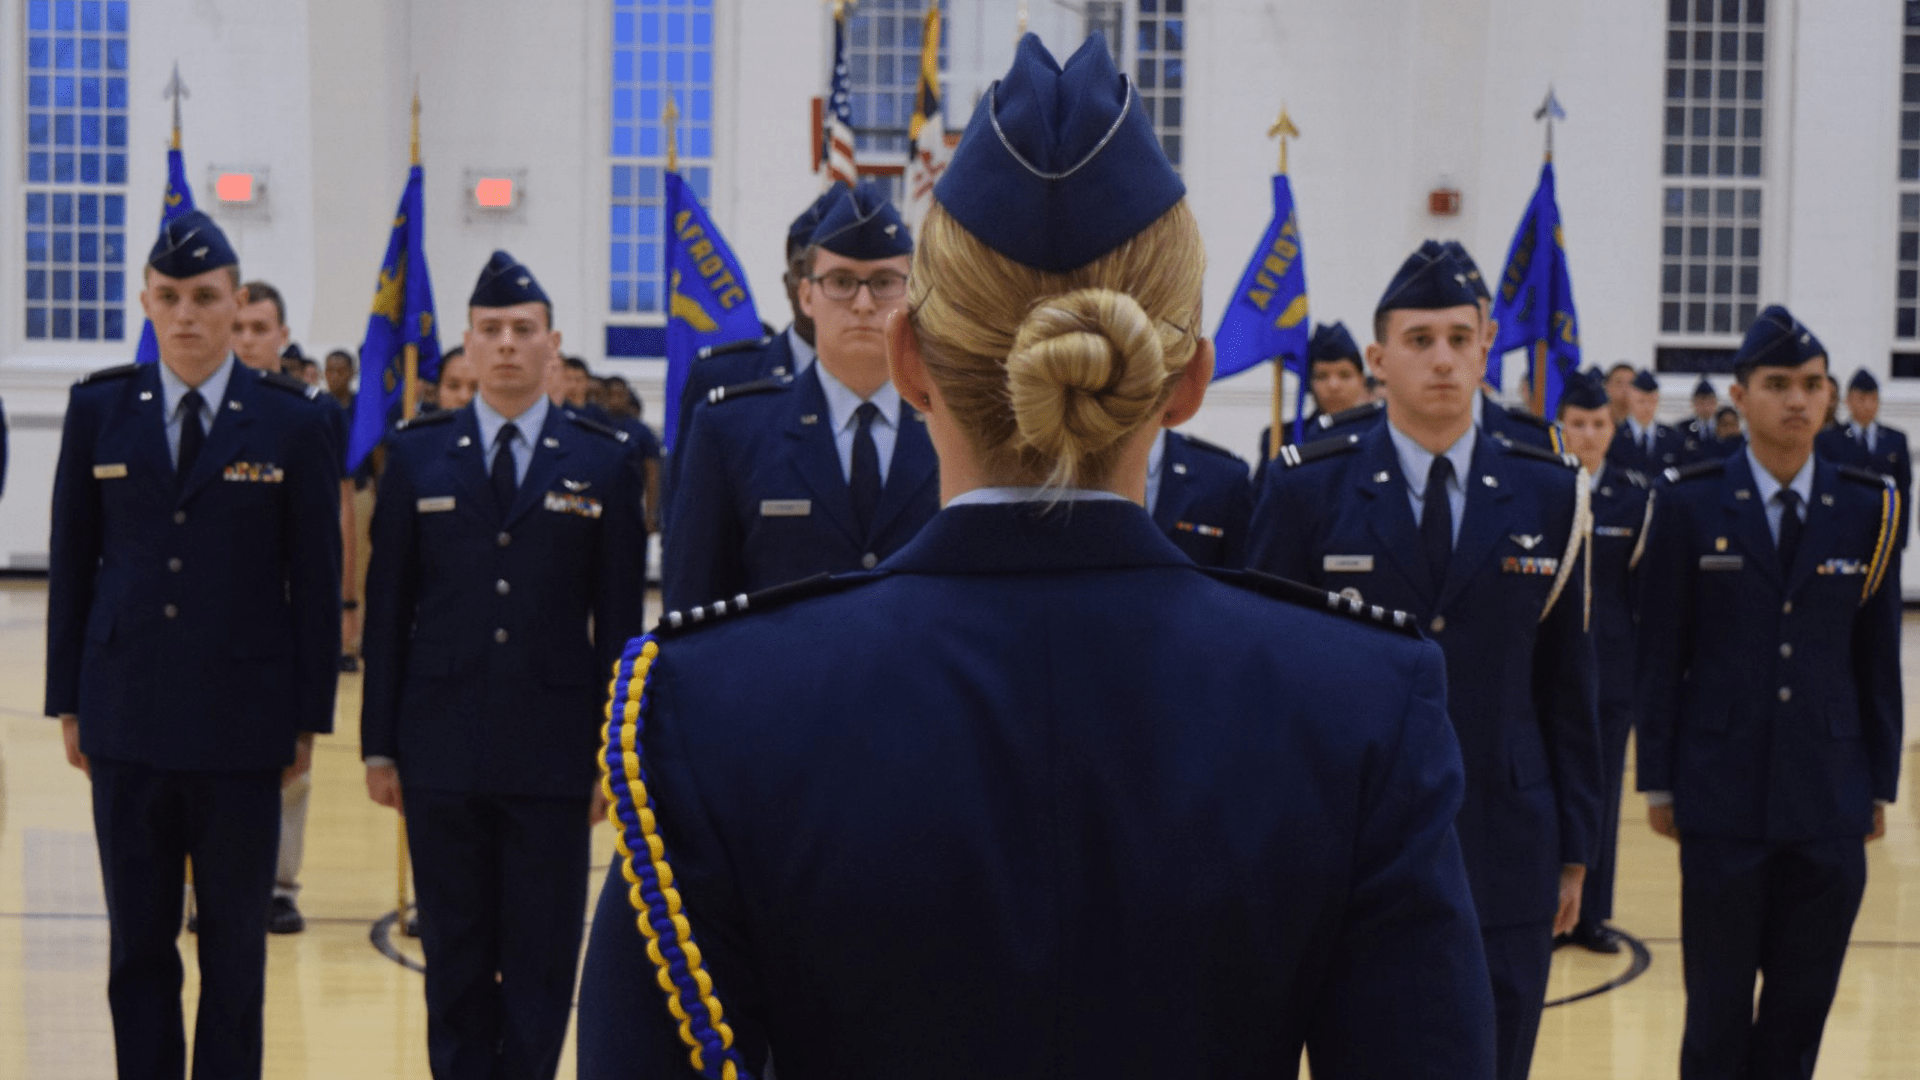 cadets at attention facing leader